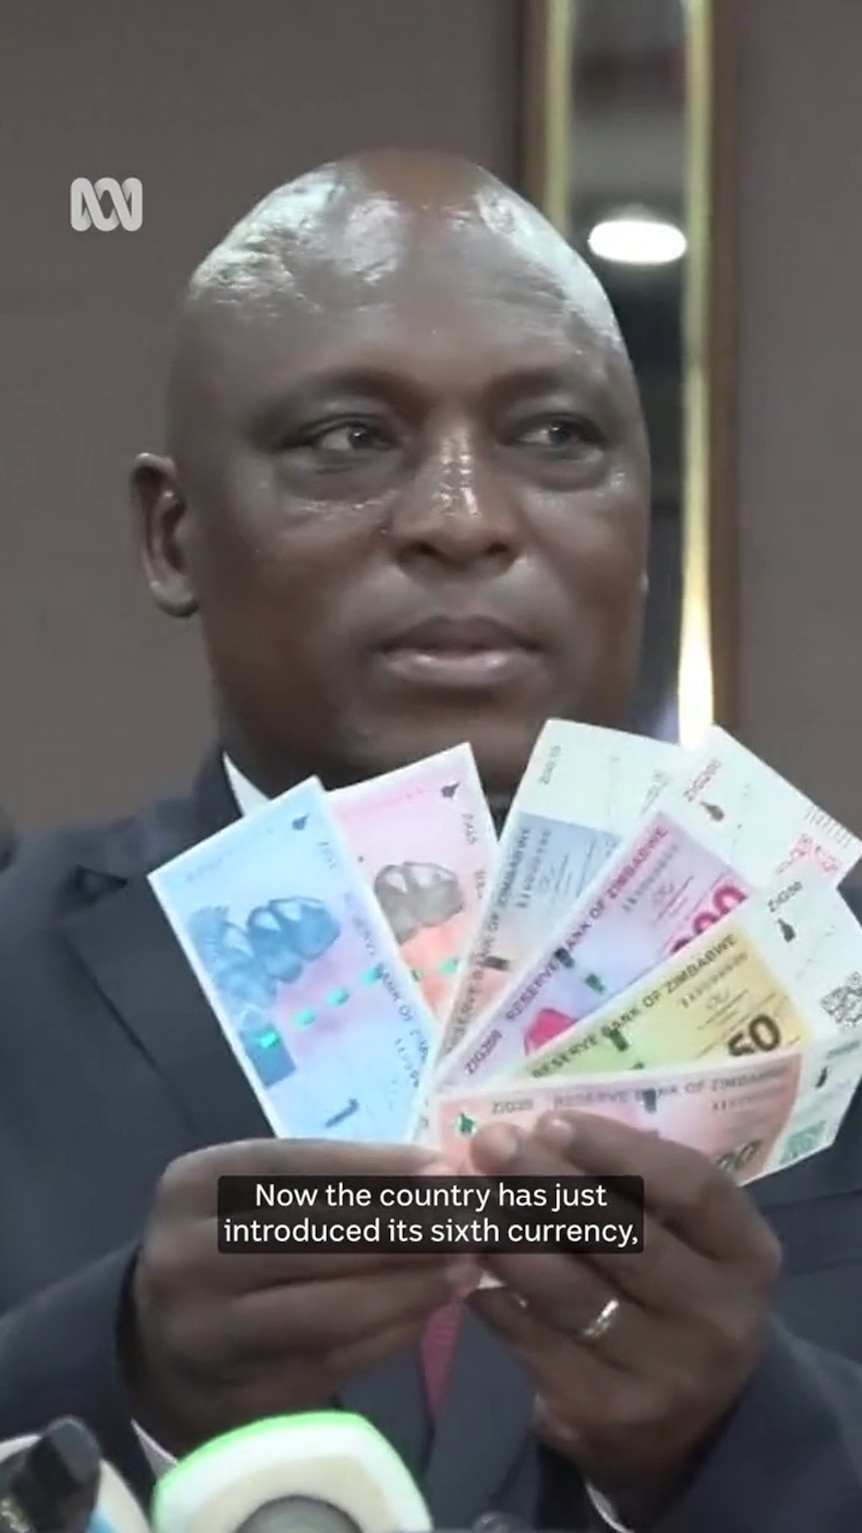 A Black man in a suit holds up a selection of colourful banknotes fanned out in front of him